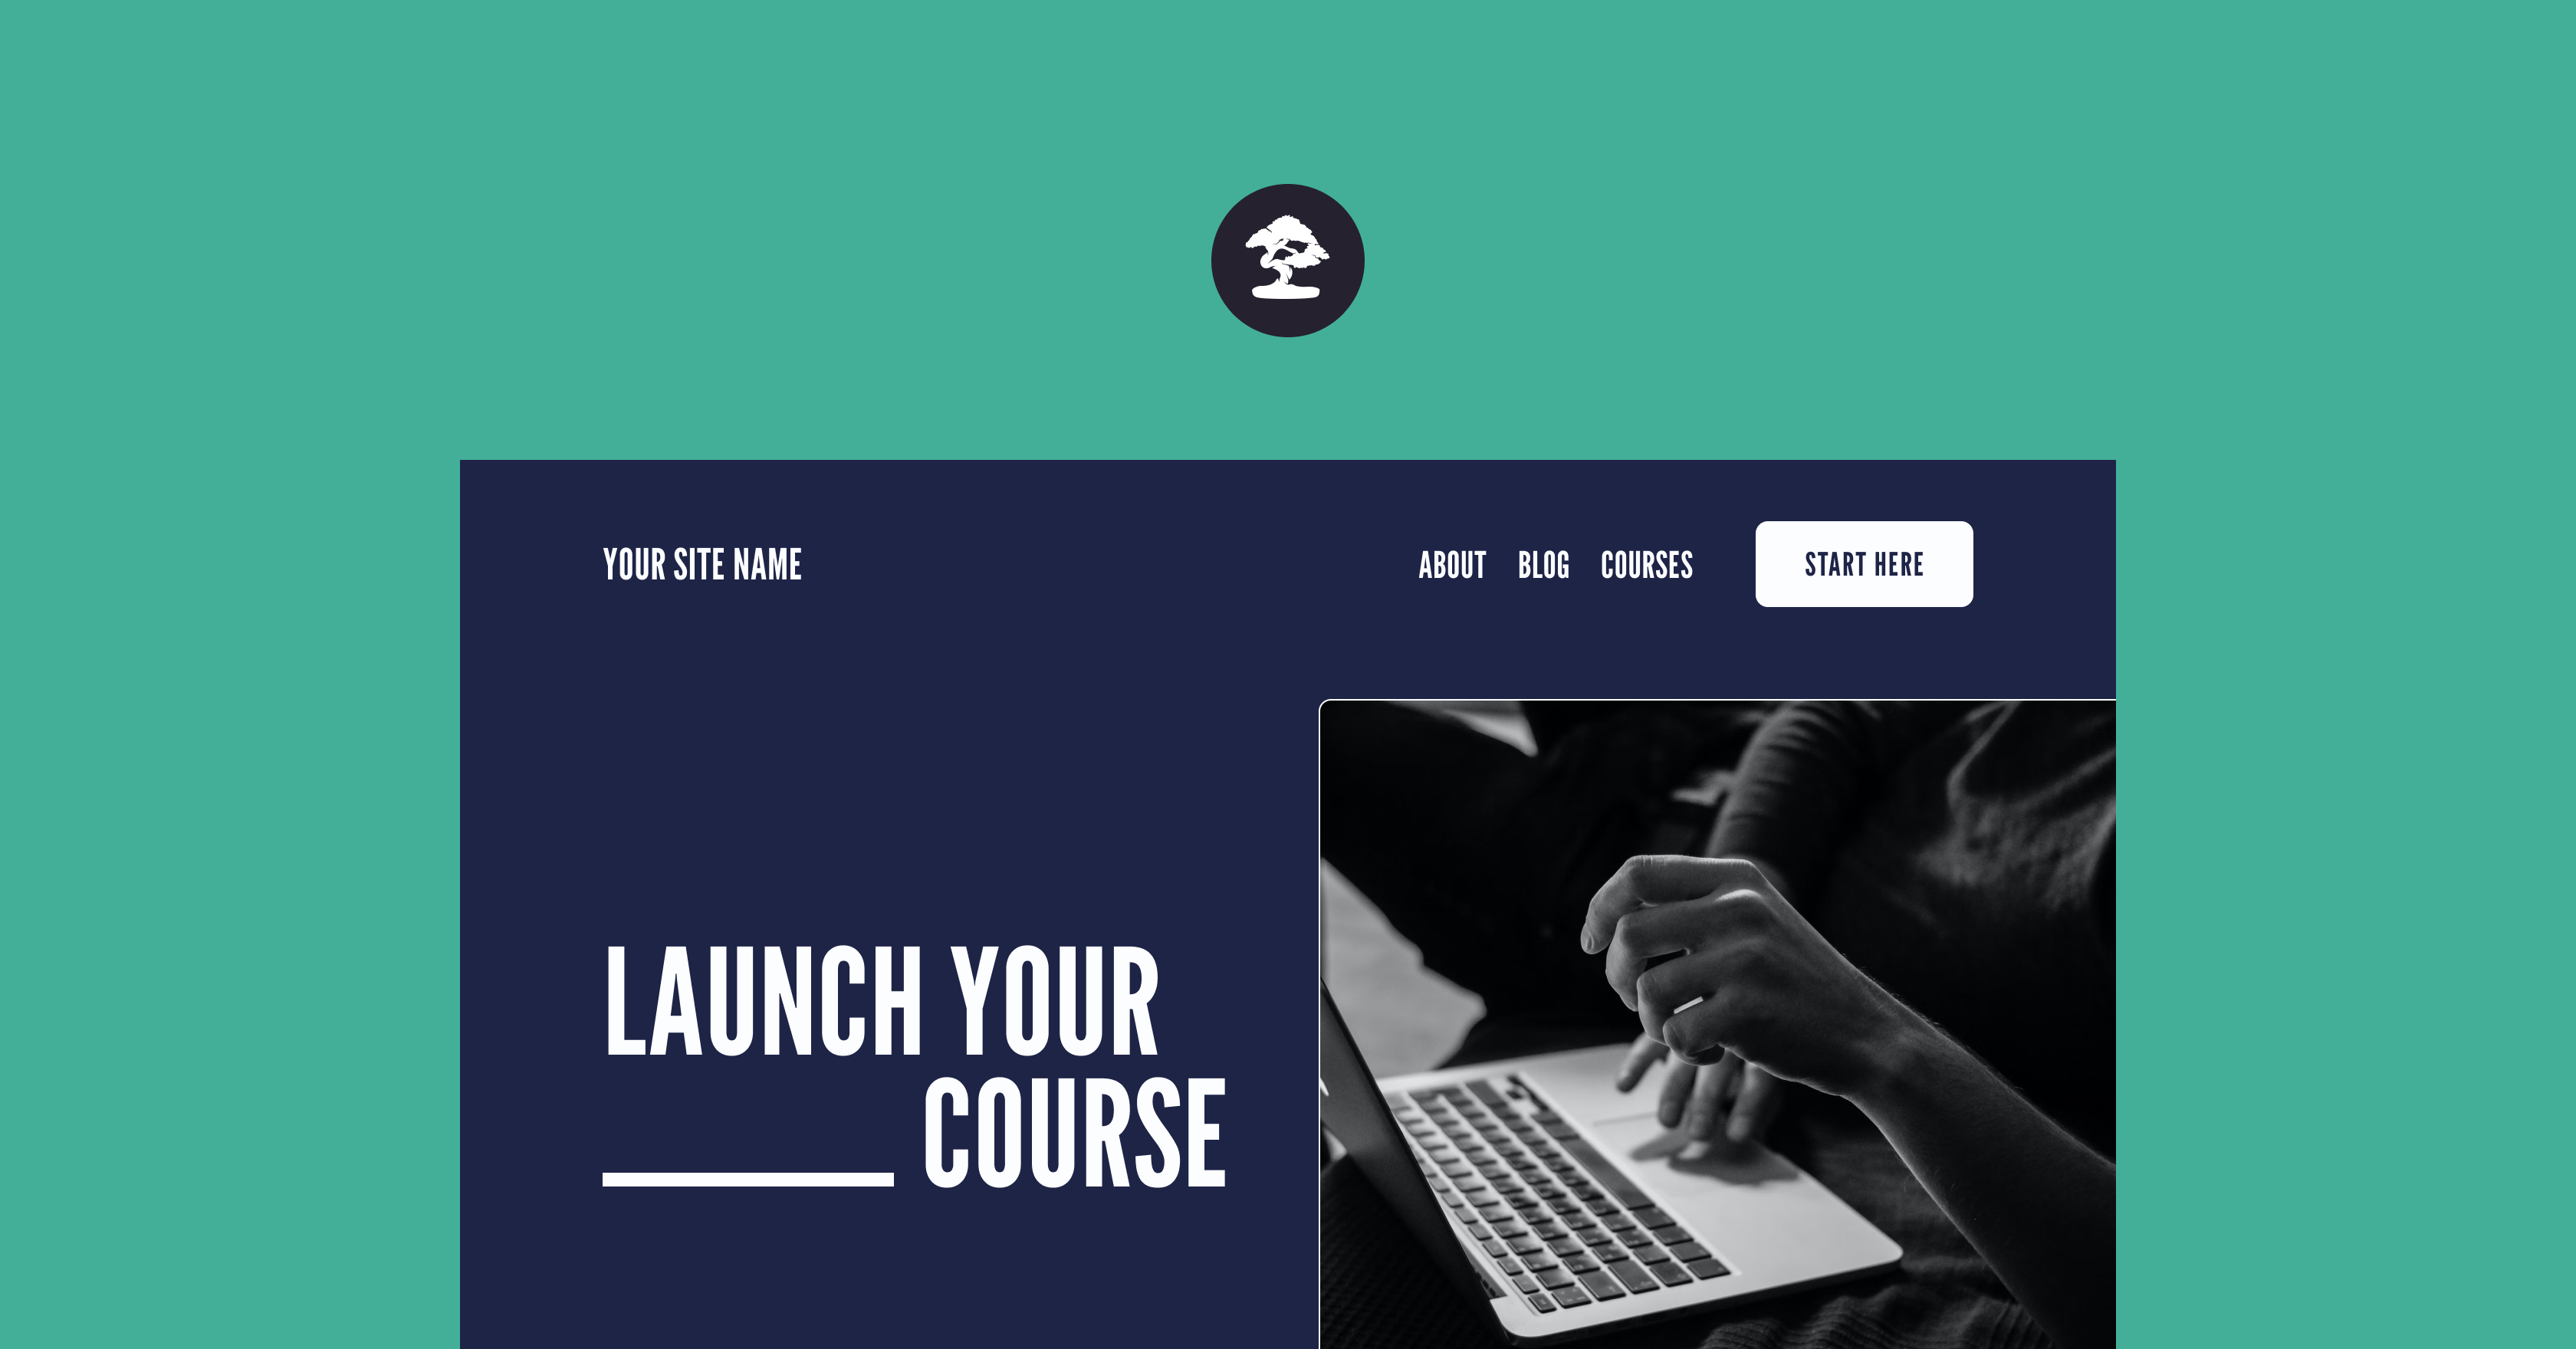 How to launch an online course: 7-step checklist to success